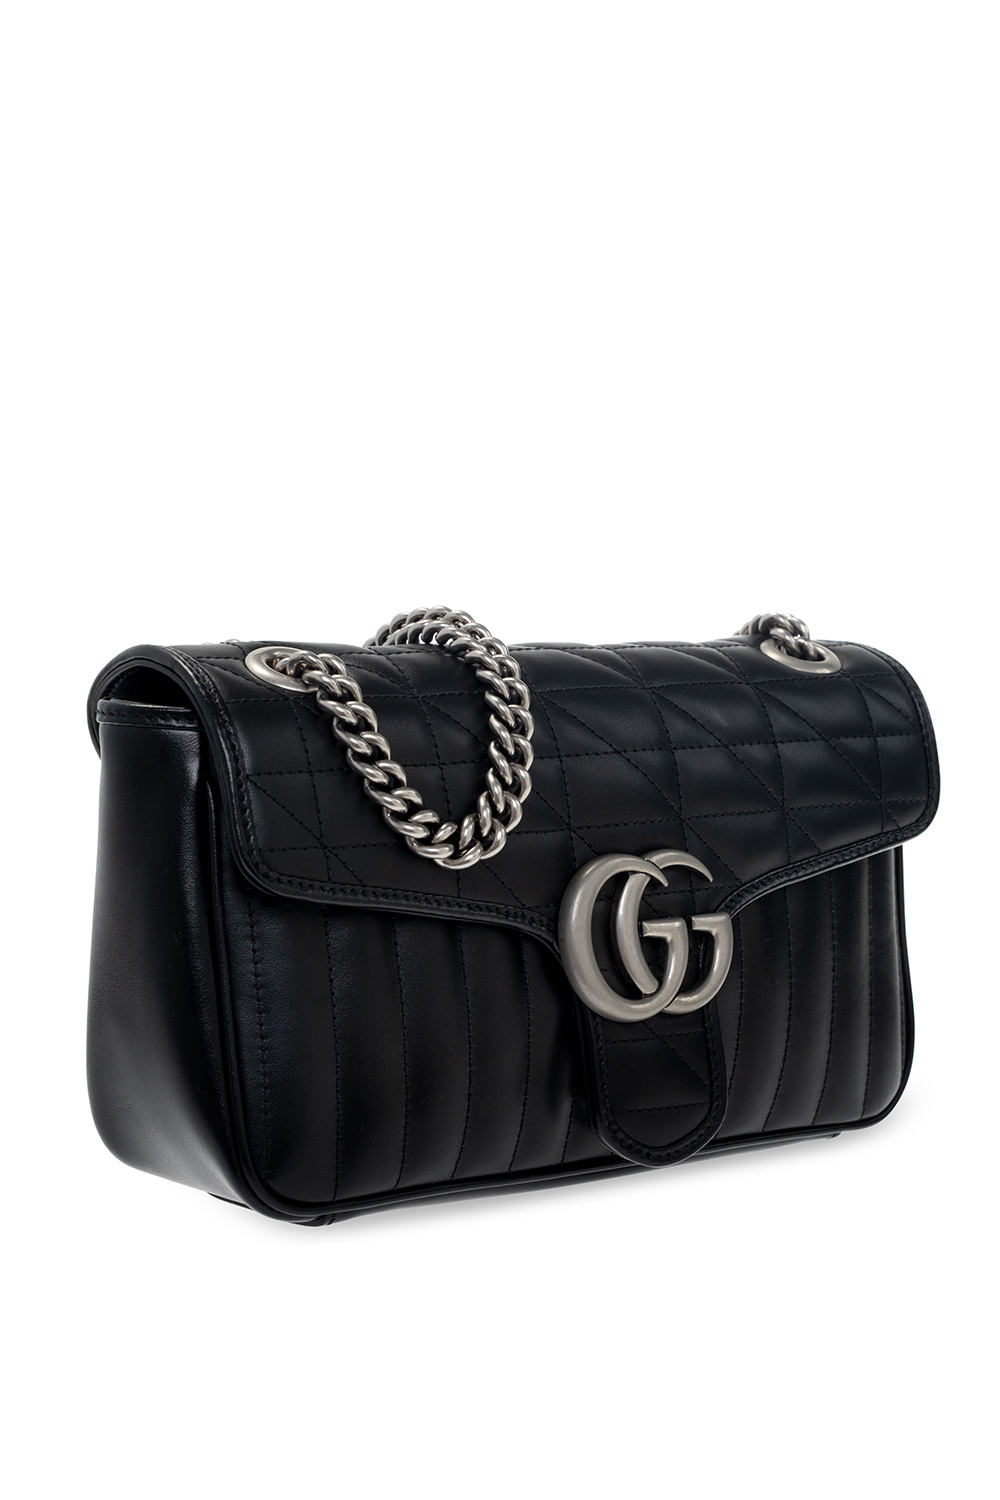 gucci rectangle ‘GG Marmont Small’ shoulder bag